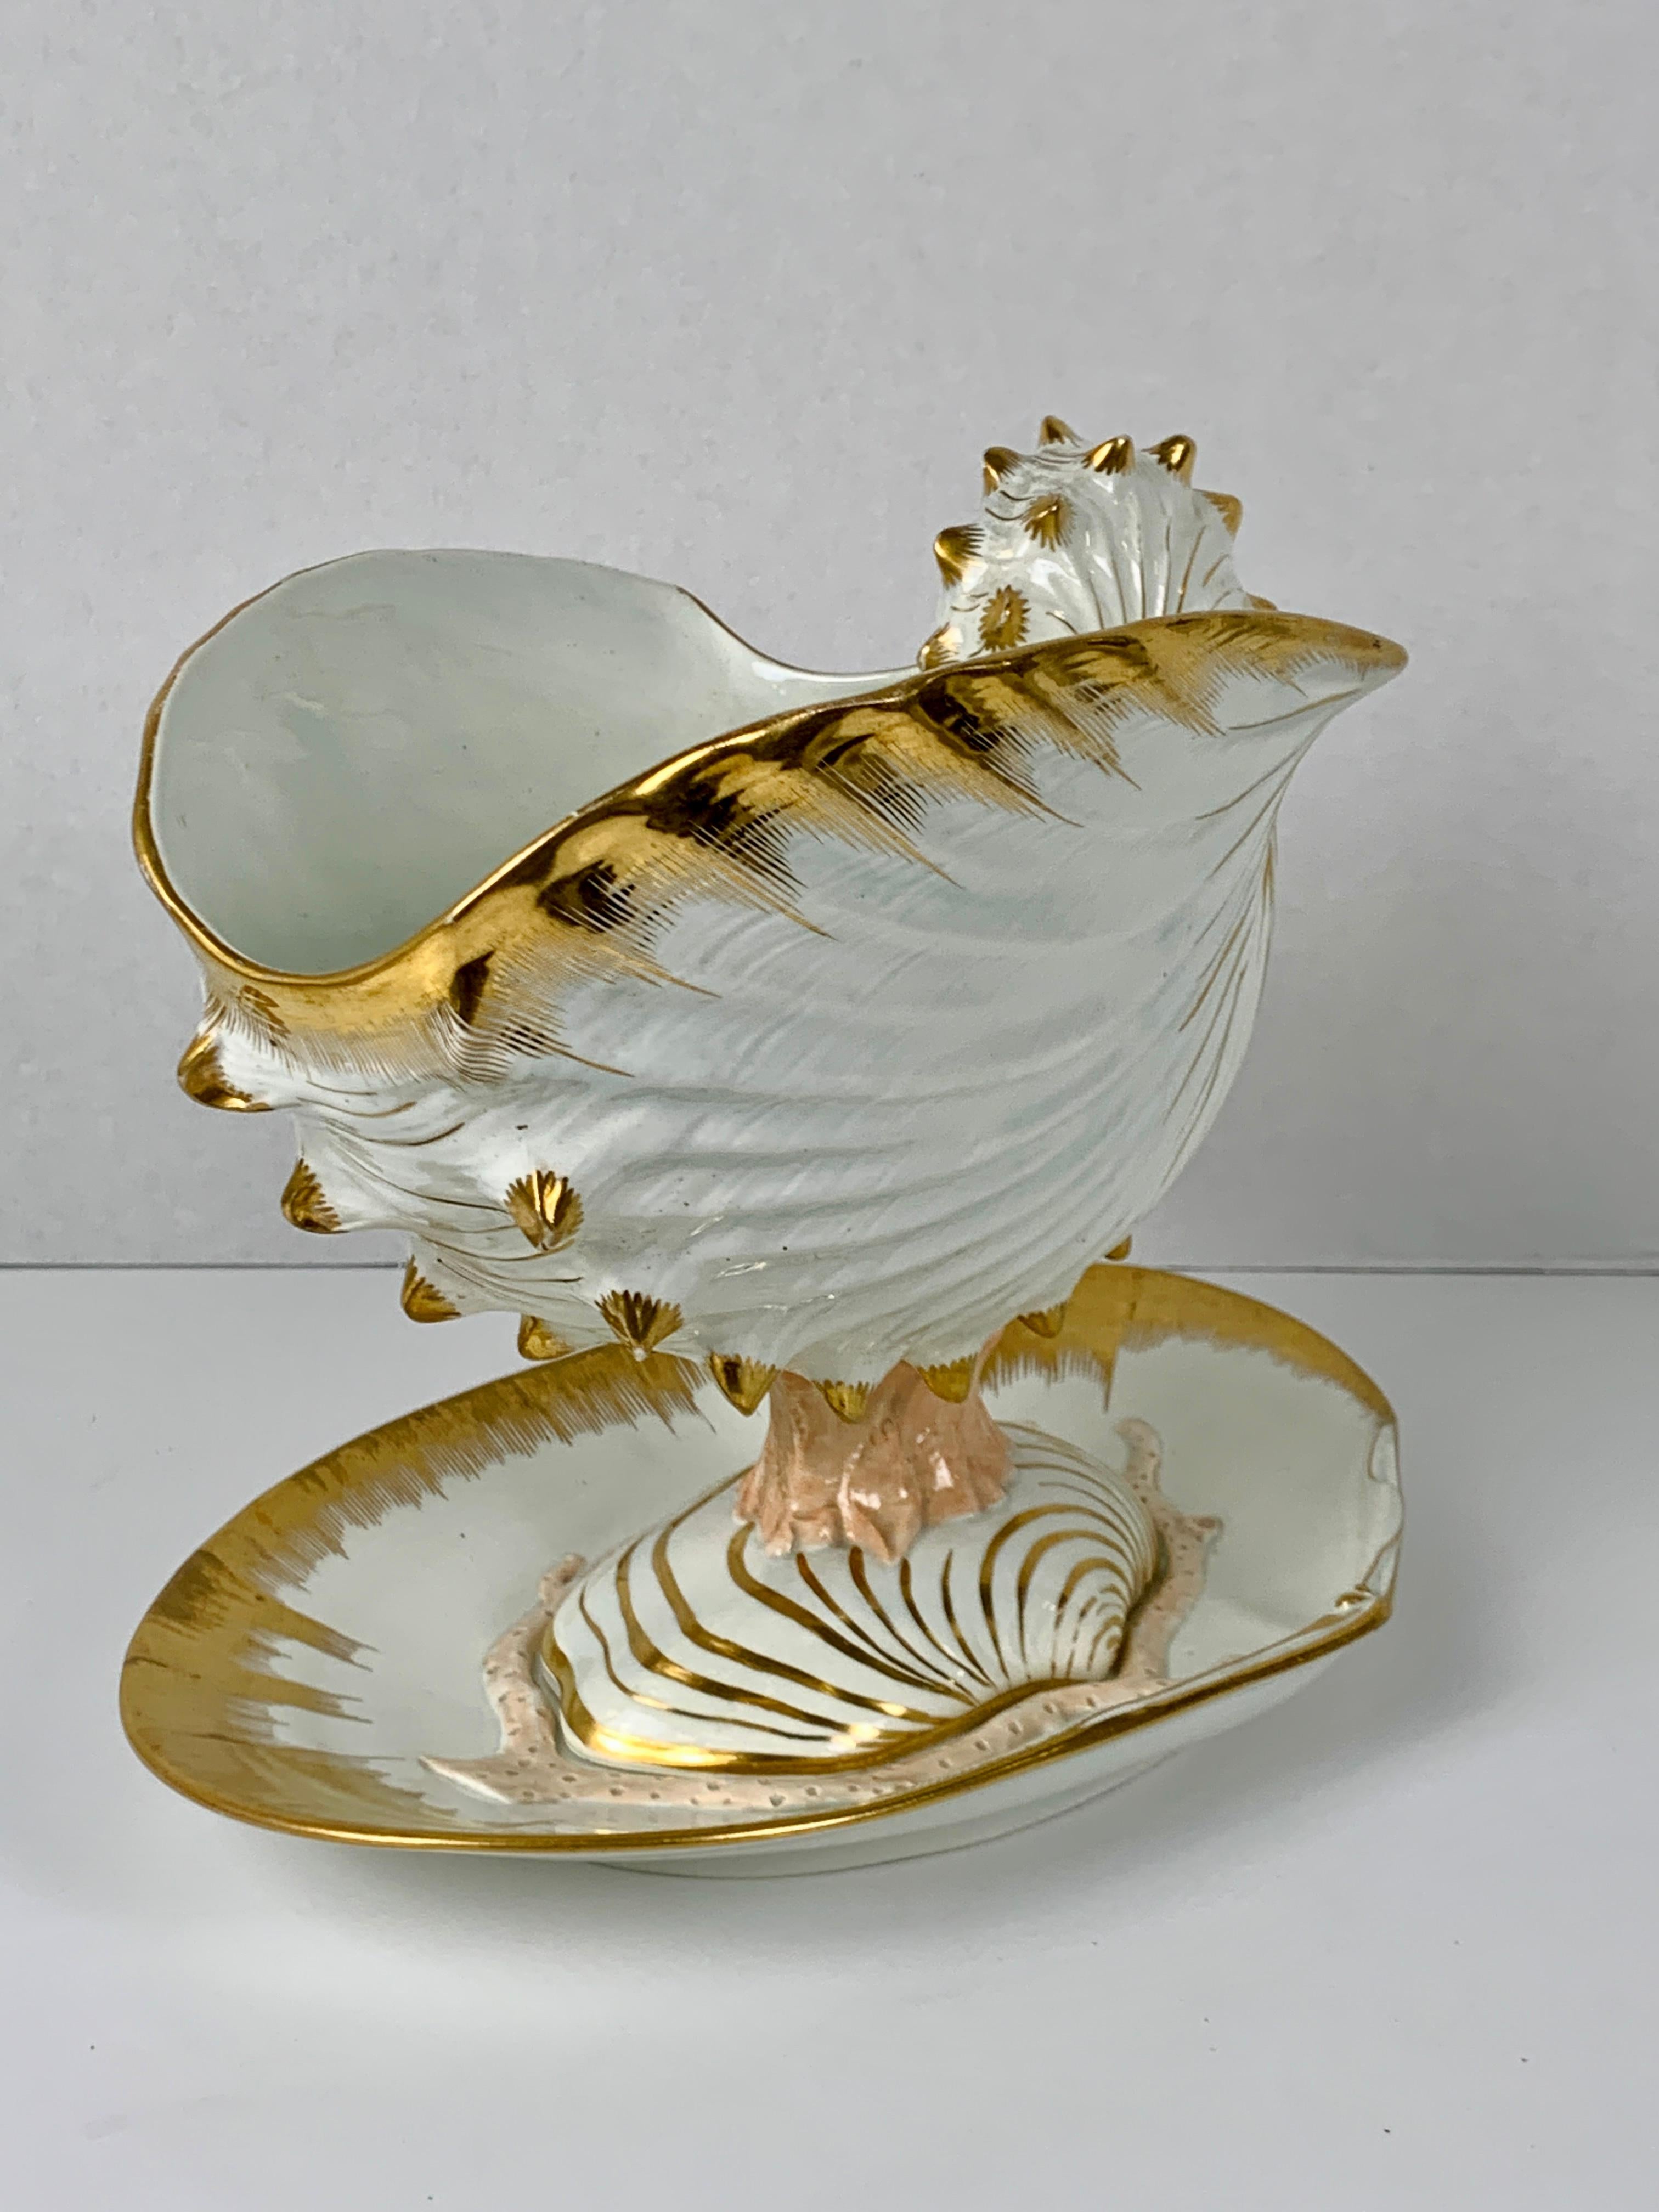 Wedgwood Set with Scallop Shell Shaped Dishes, Clam Shaped Tureens & a Nautilus 5